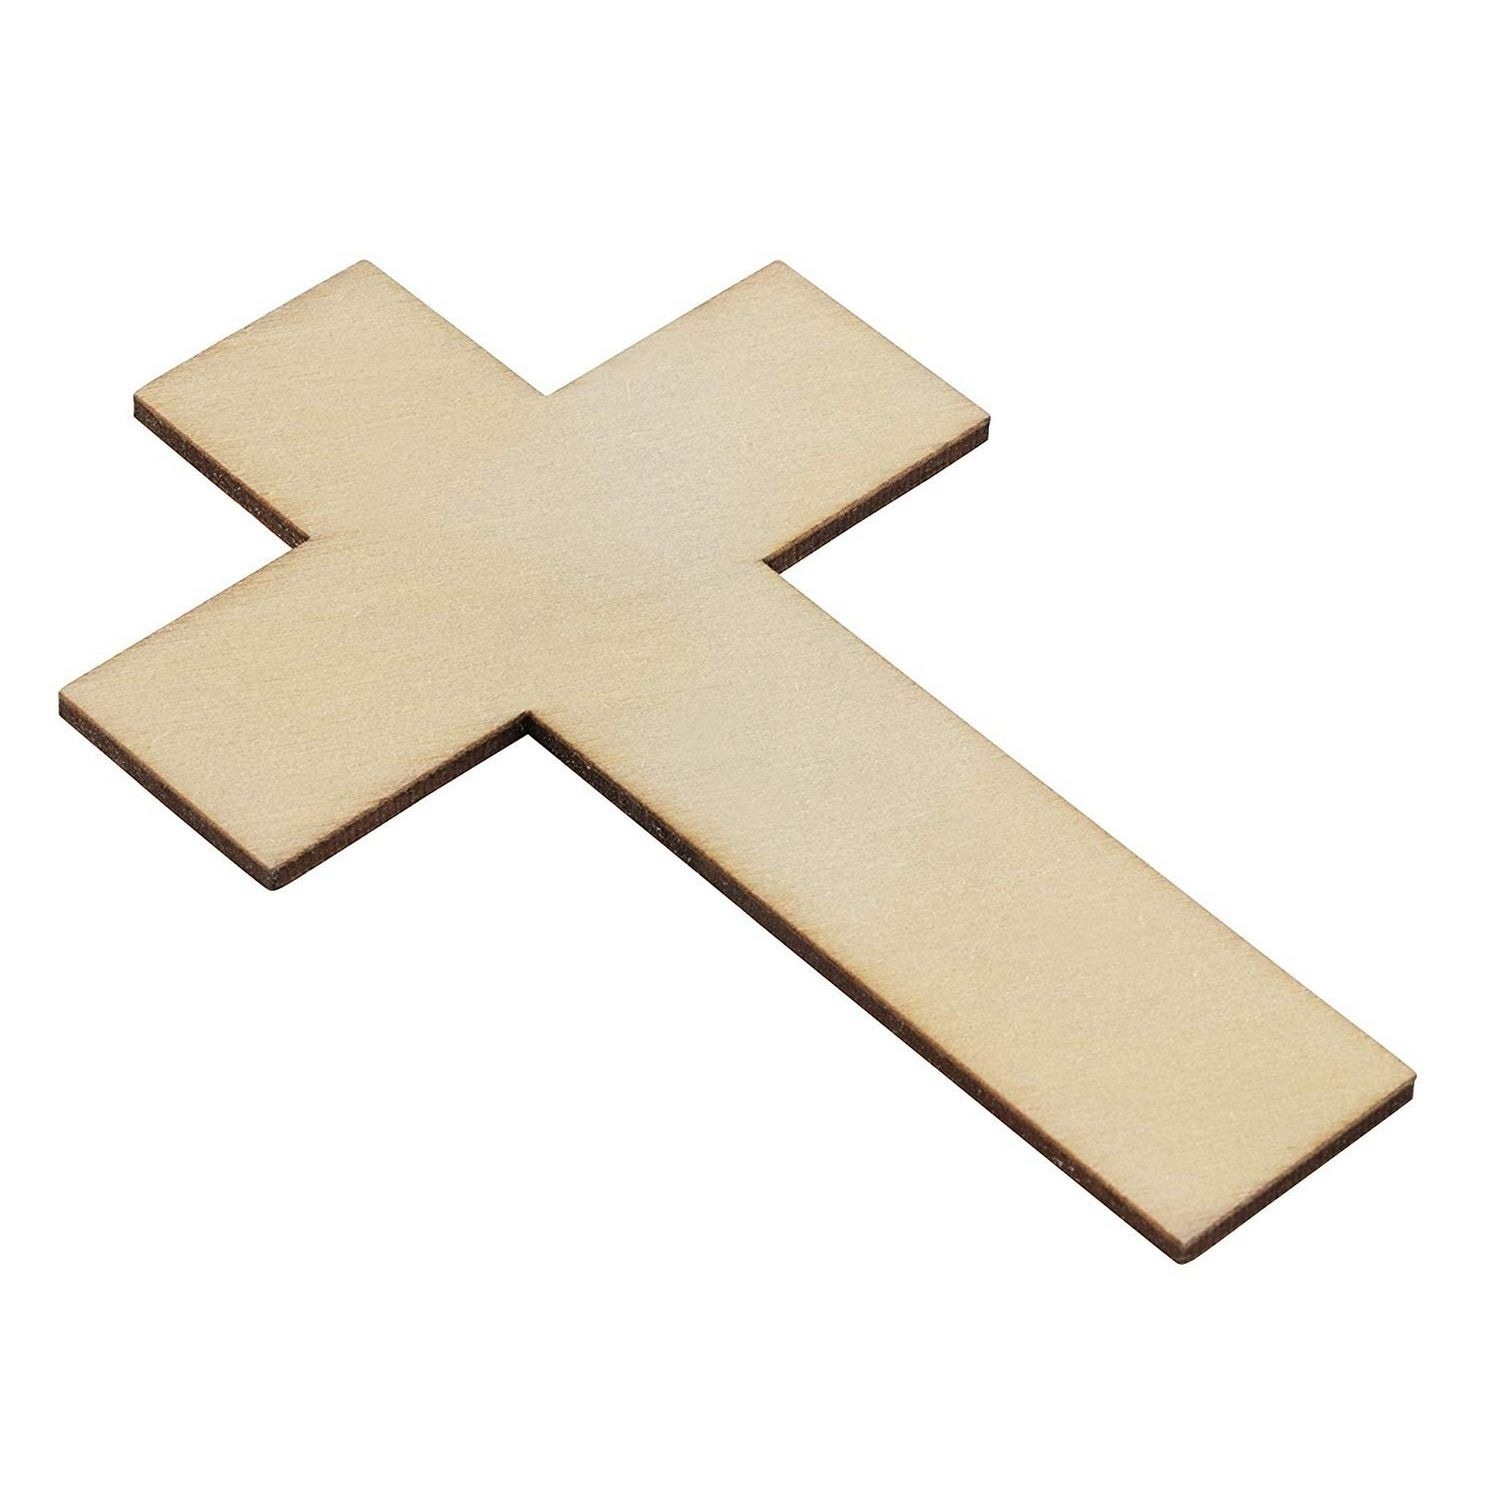 25-Pack Unfinished Wood Cross Shaped Cutout for Wooden Craft DIY &  Decoration, PACK - Kroger